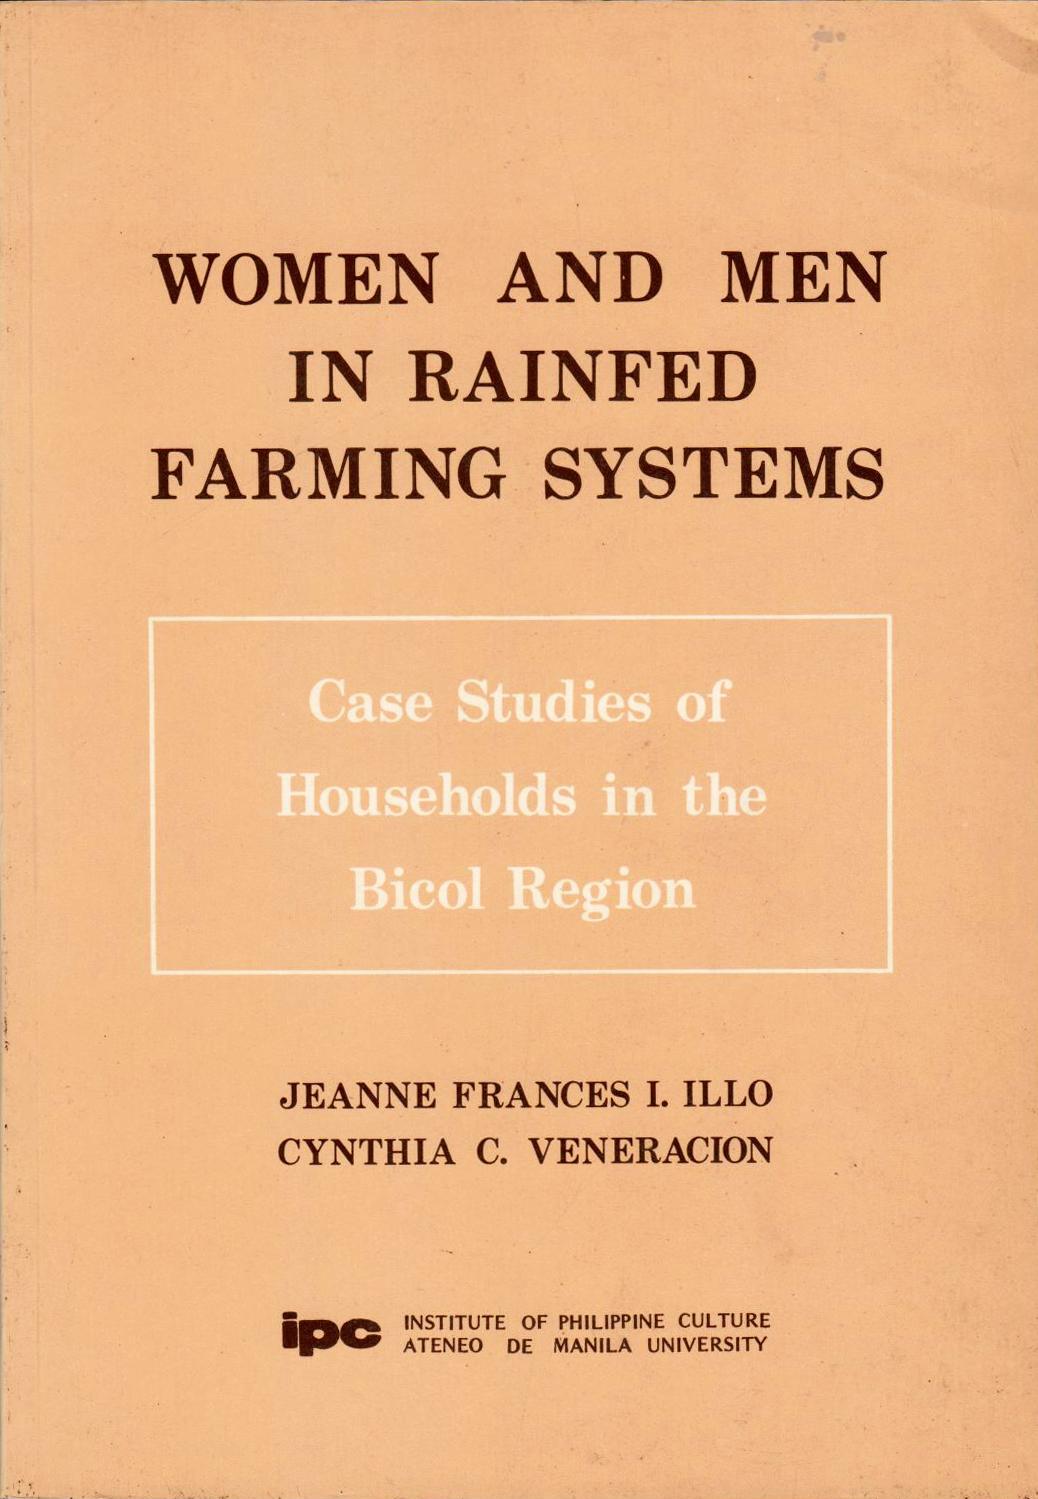 Women and Men in Rainfed Farming Systems: Case Studies of Households in the Bicol Region